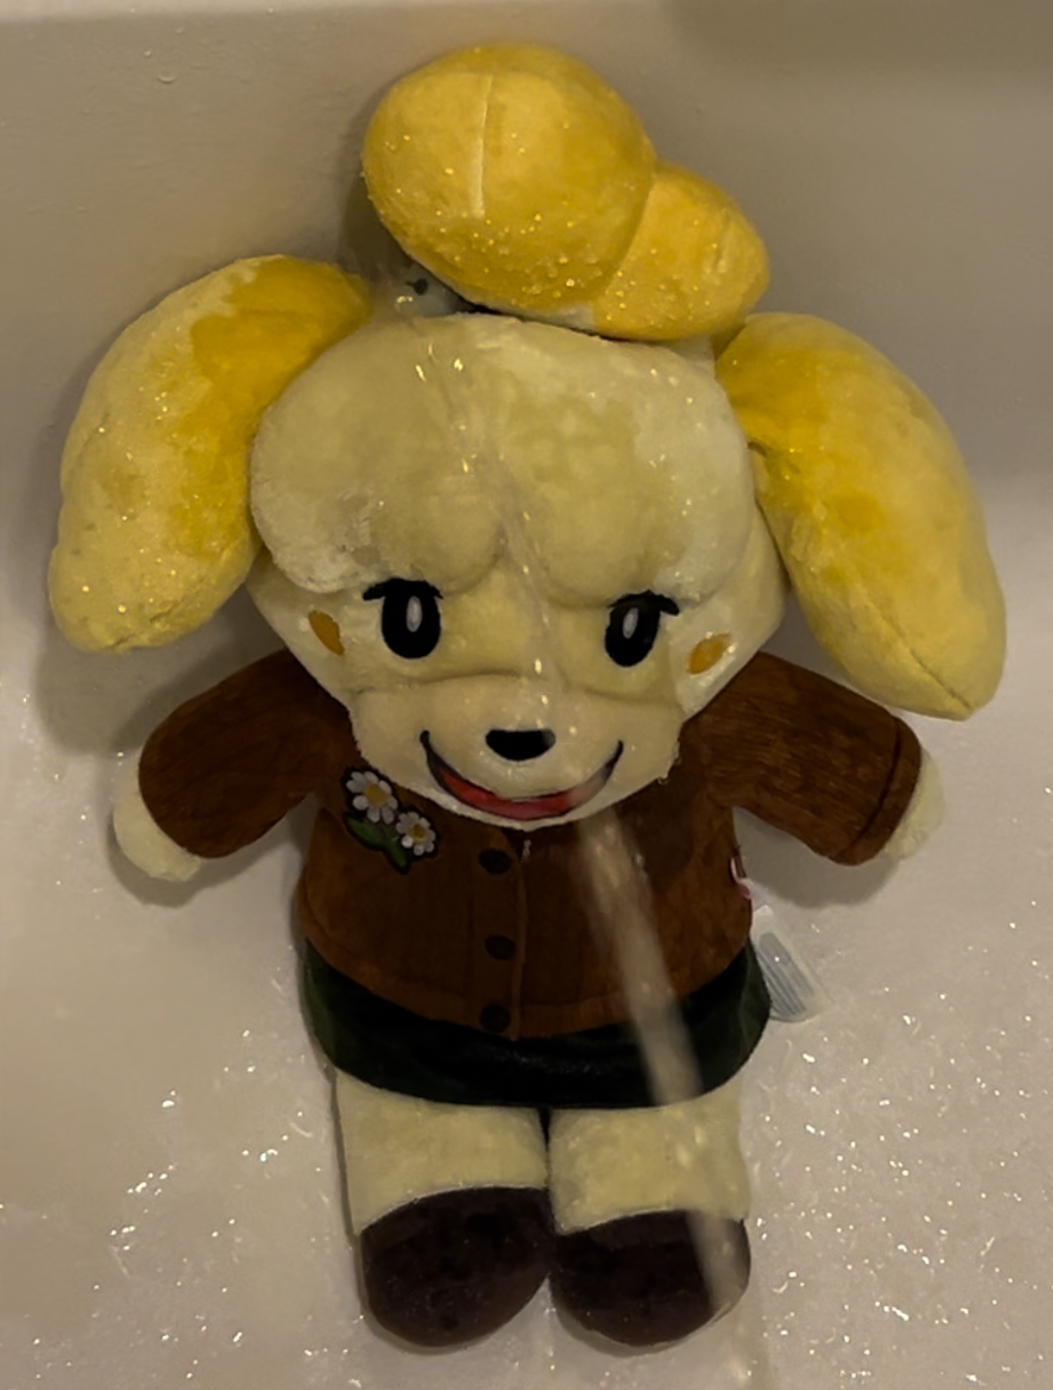 Isabelle Wanted A Golden Shower Too!